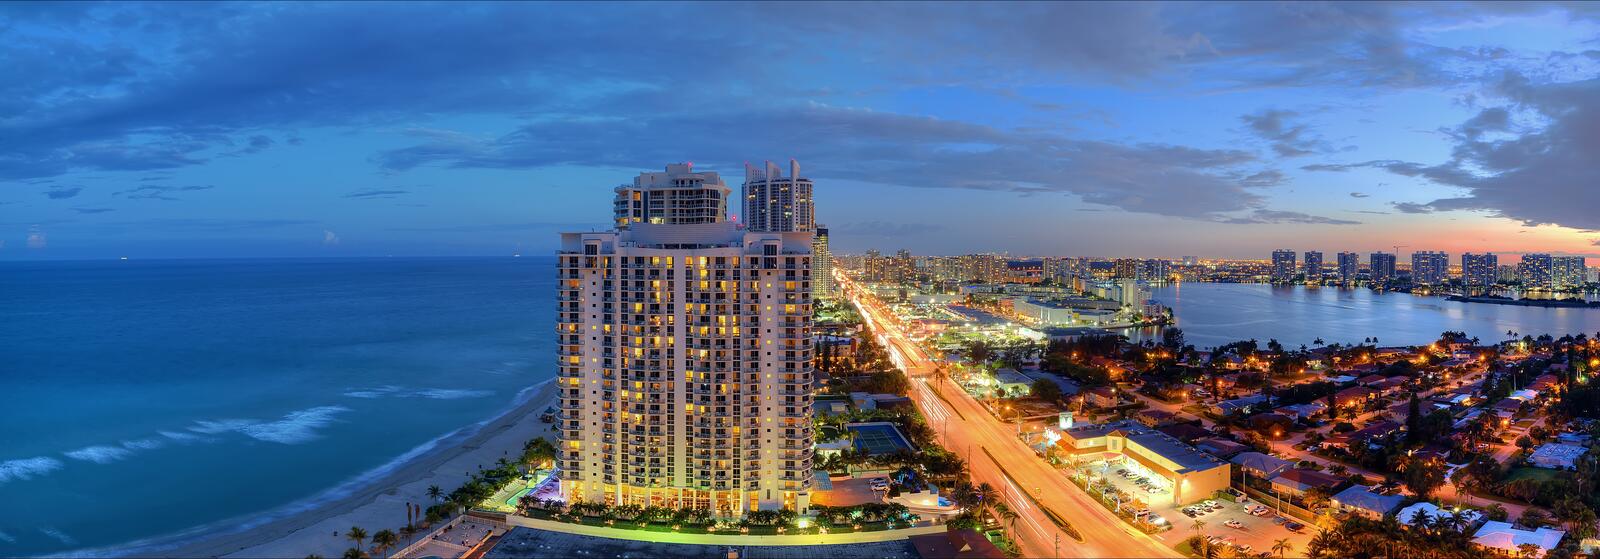 Wallpapers Sunny Isles Shores North Miami beach FL on the desktop